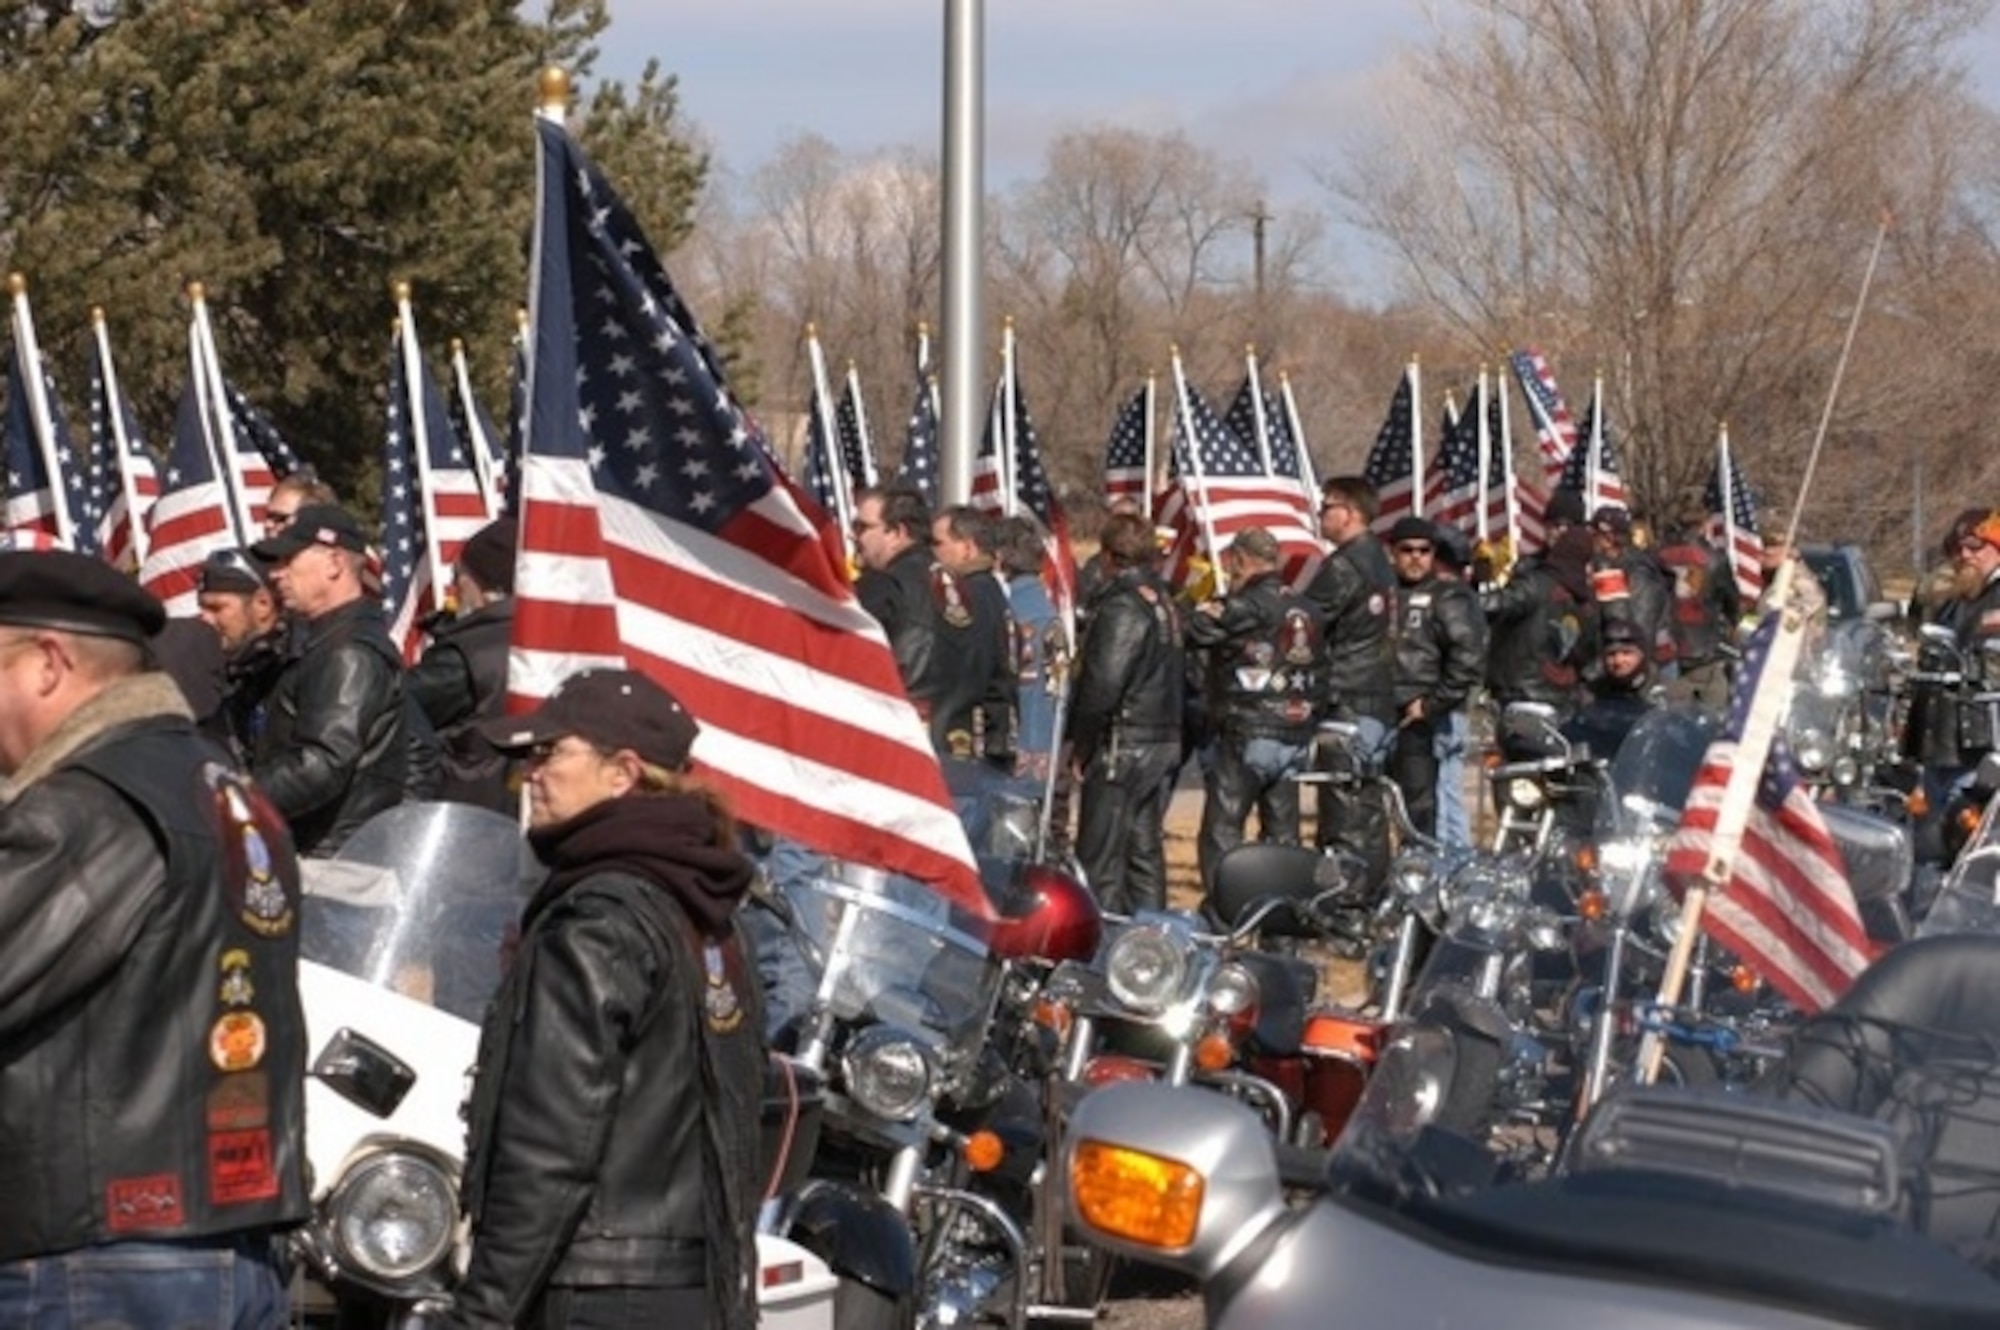 Patriot Guard Riders members attend a military funeral to show support for the fallen servicemember and family members. (Courtesy photo)